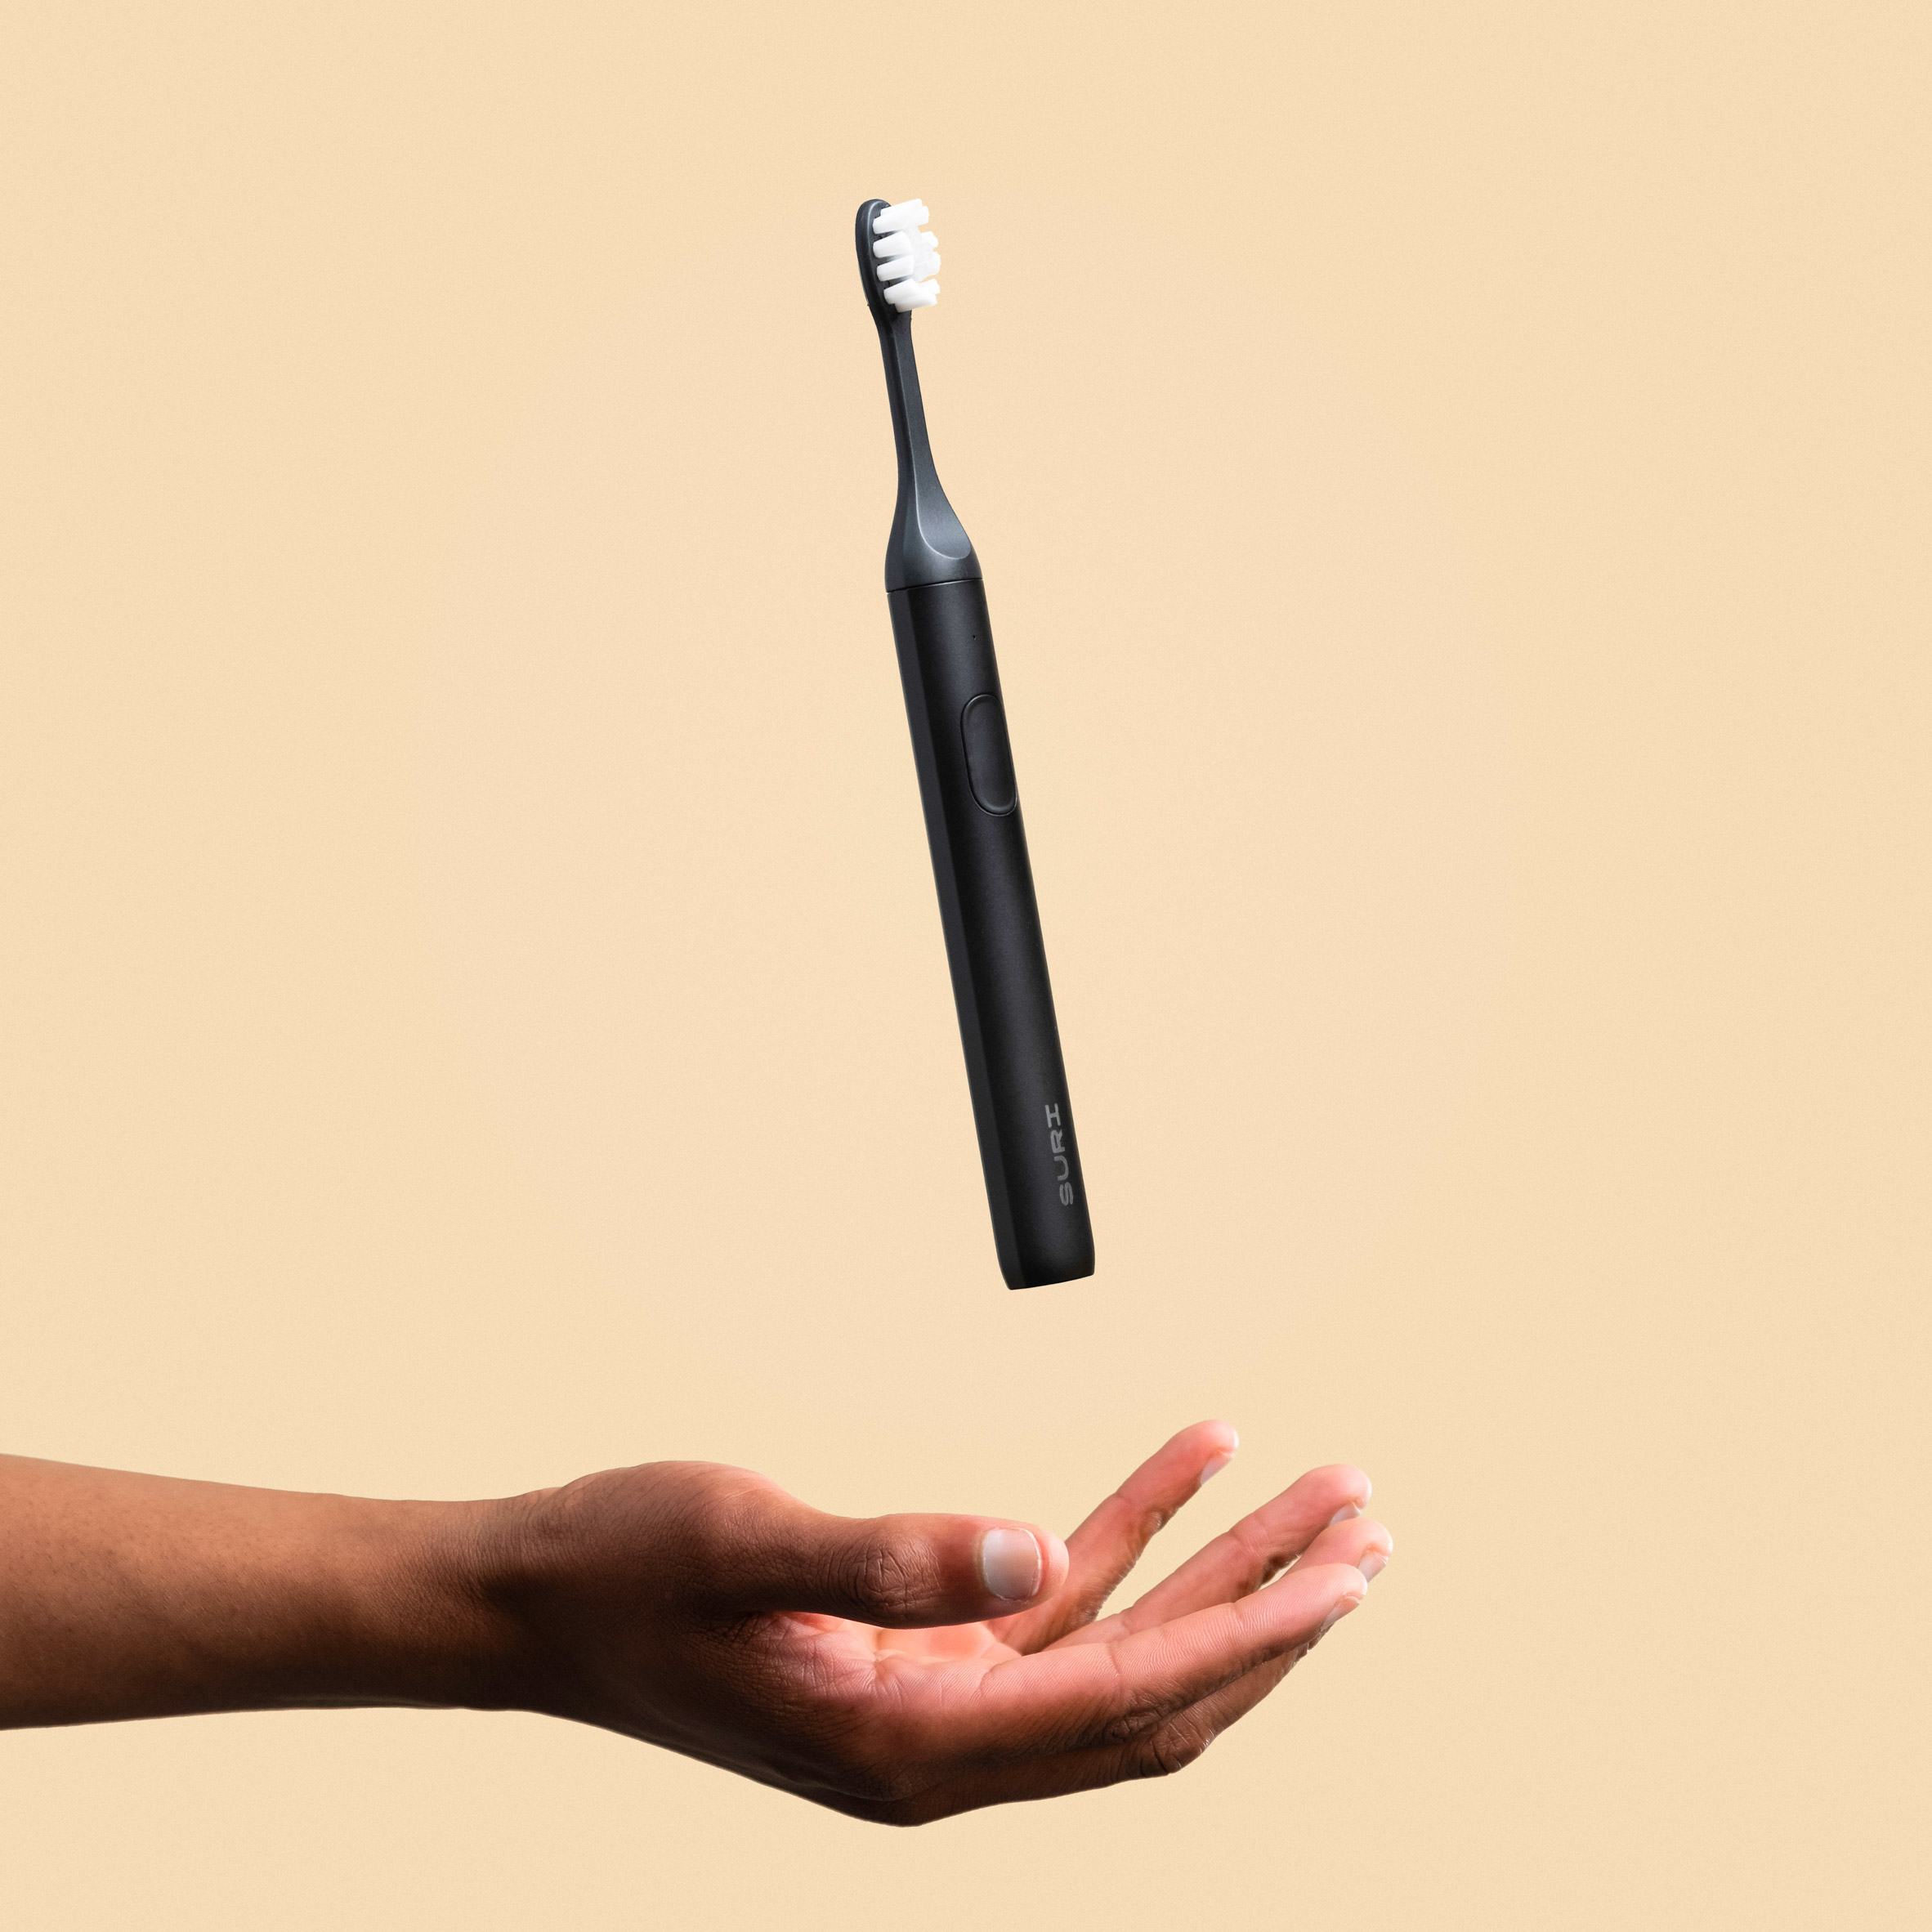 A hand throwing a black electric toothbrush in the air